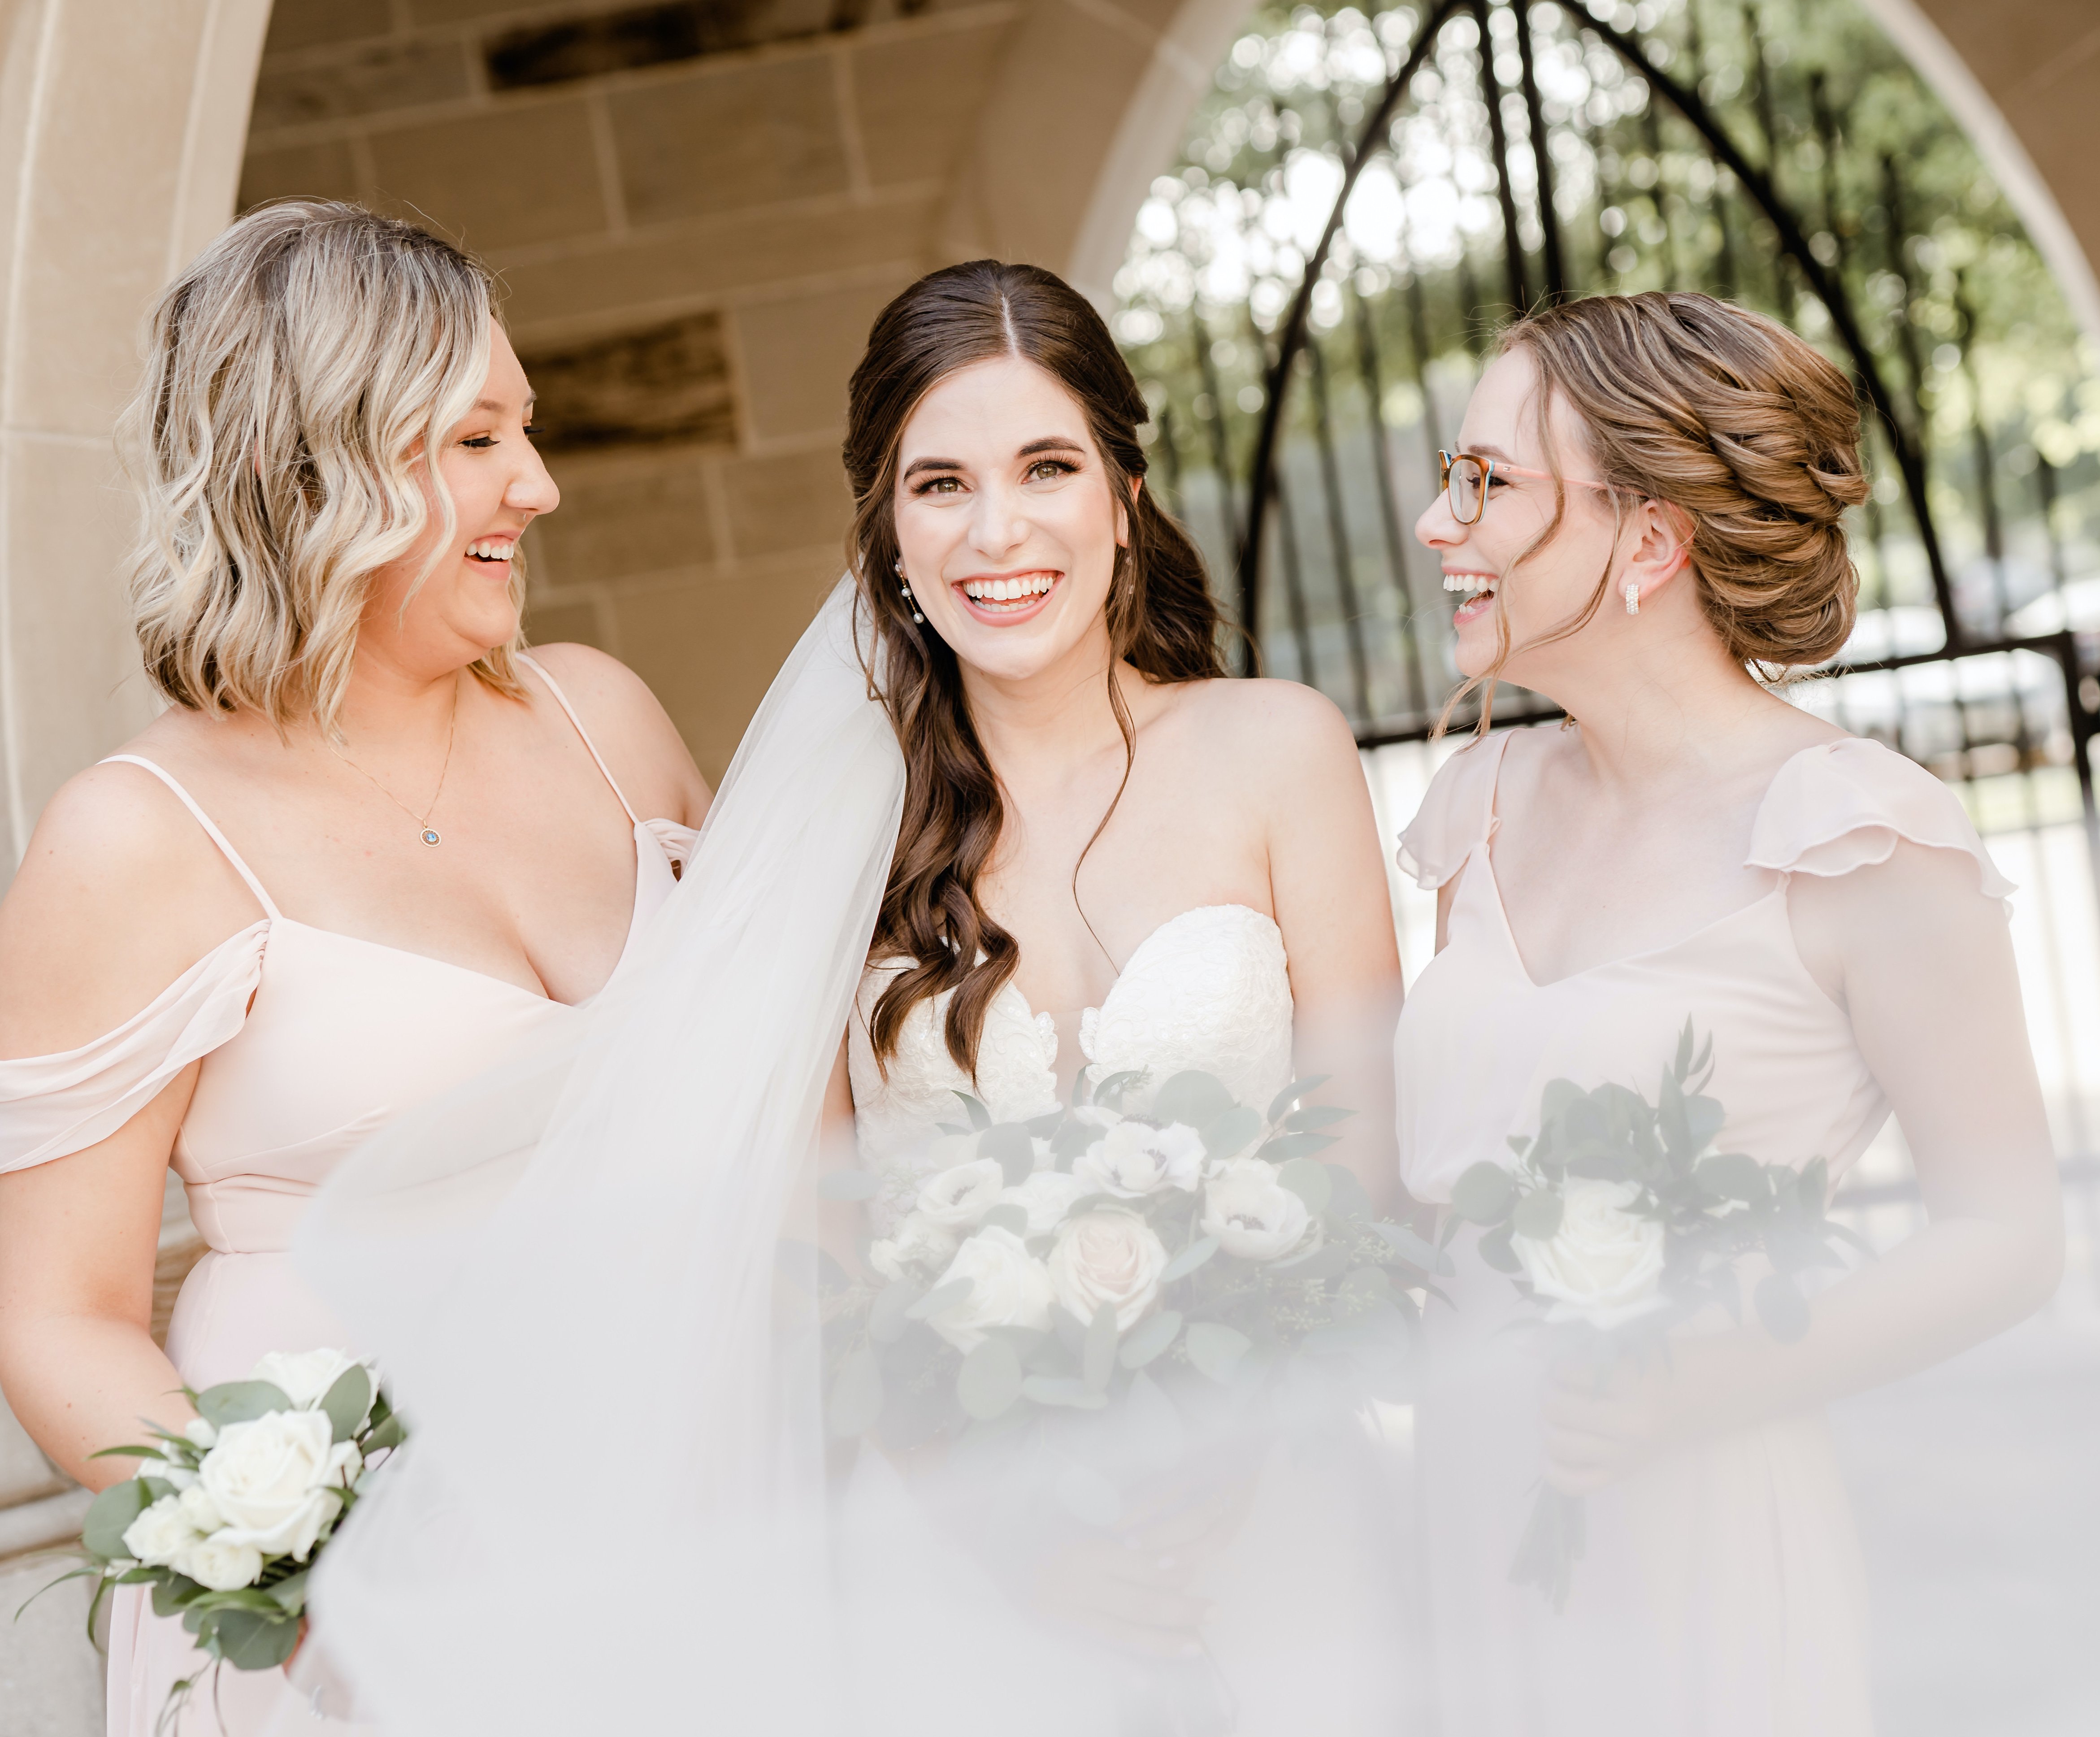 A bride stands in the middle of two of her bridesmaids while smiling and laughing outside.